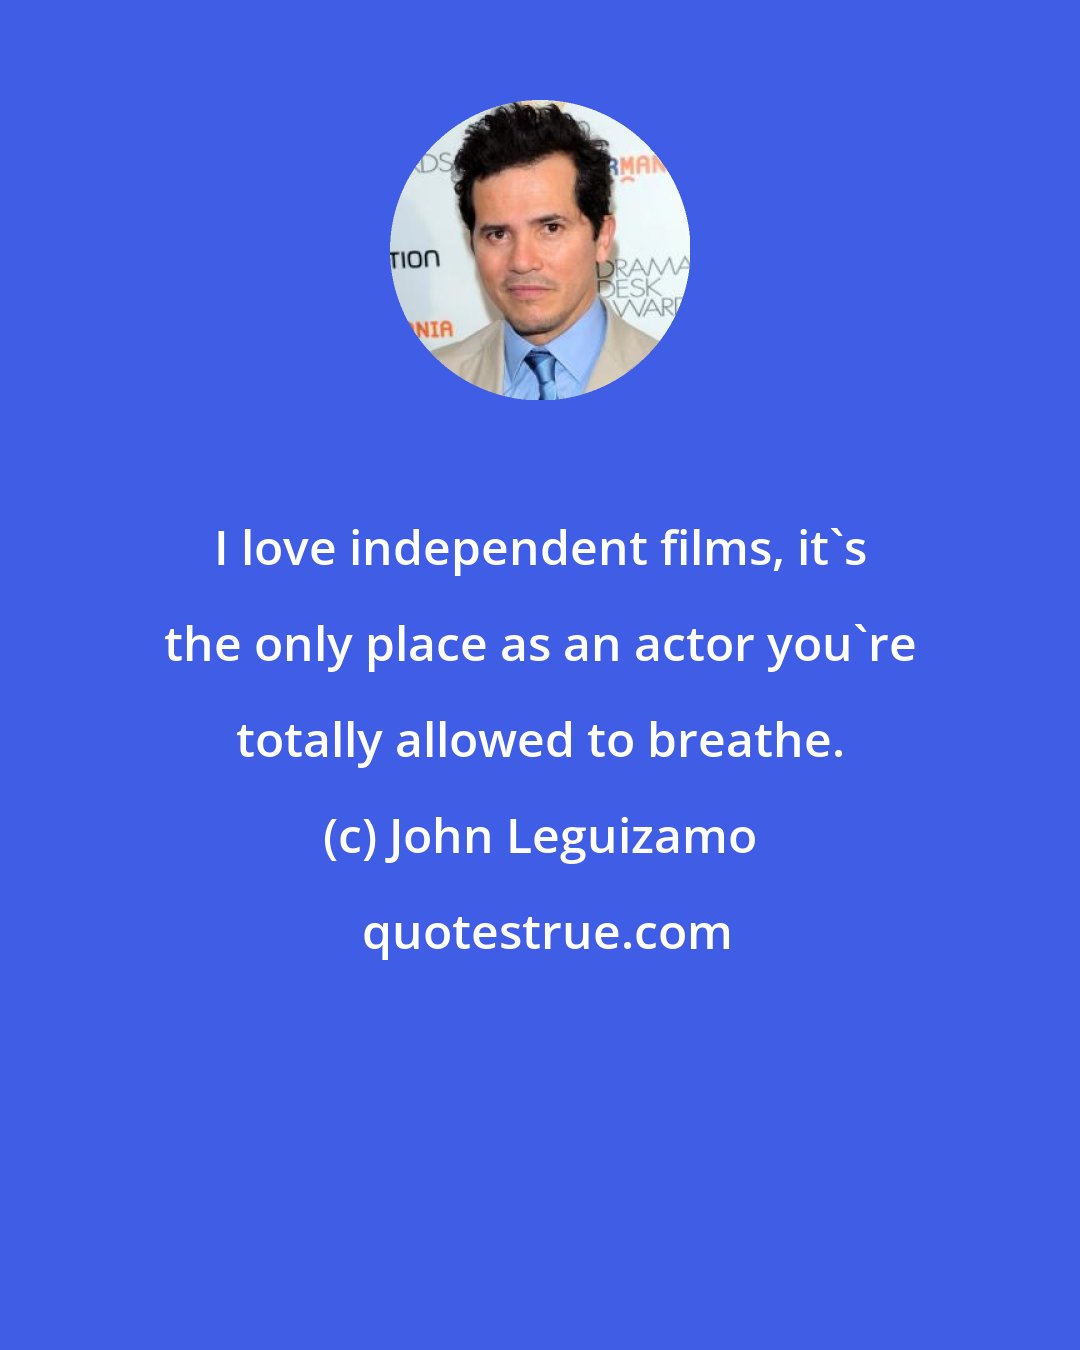 John Leguizamo: I love independent films, it's the only place as an actor you're totally allowed to breathe.